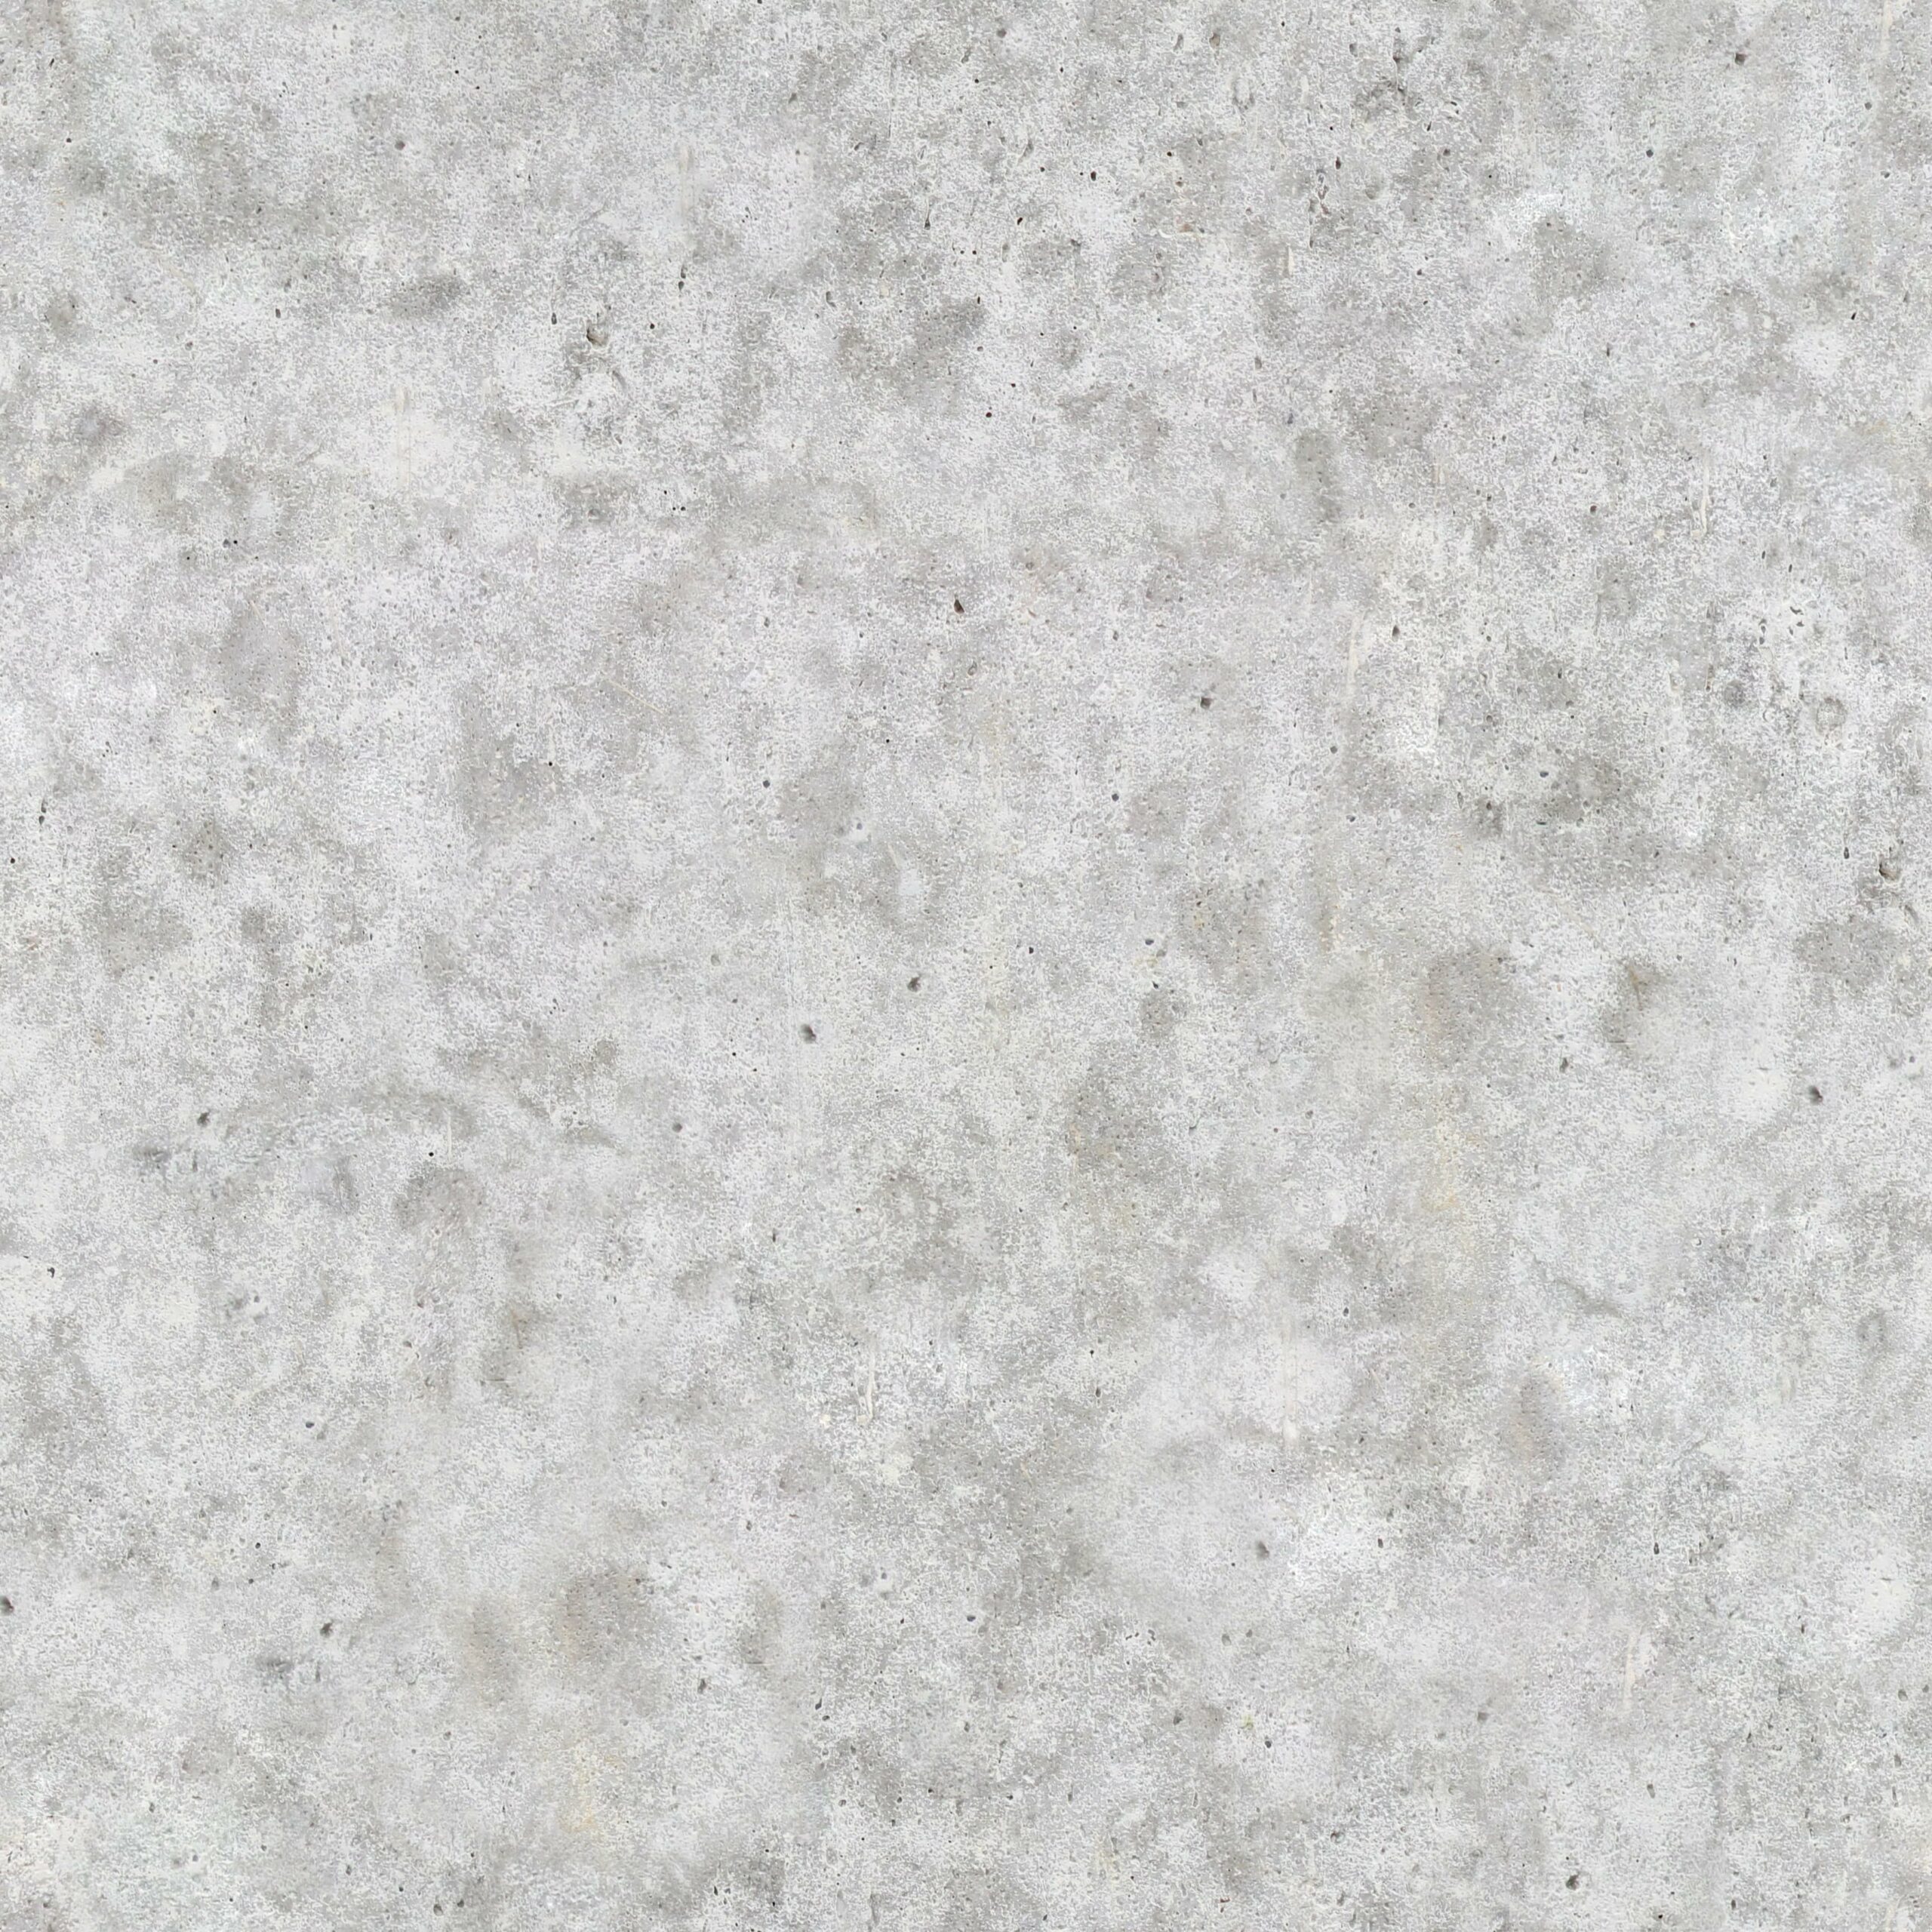 Non-uniform concrete wall – Free Seamless Textures - All rights reseved